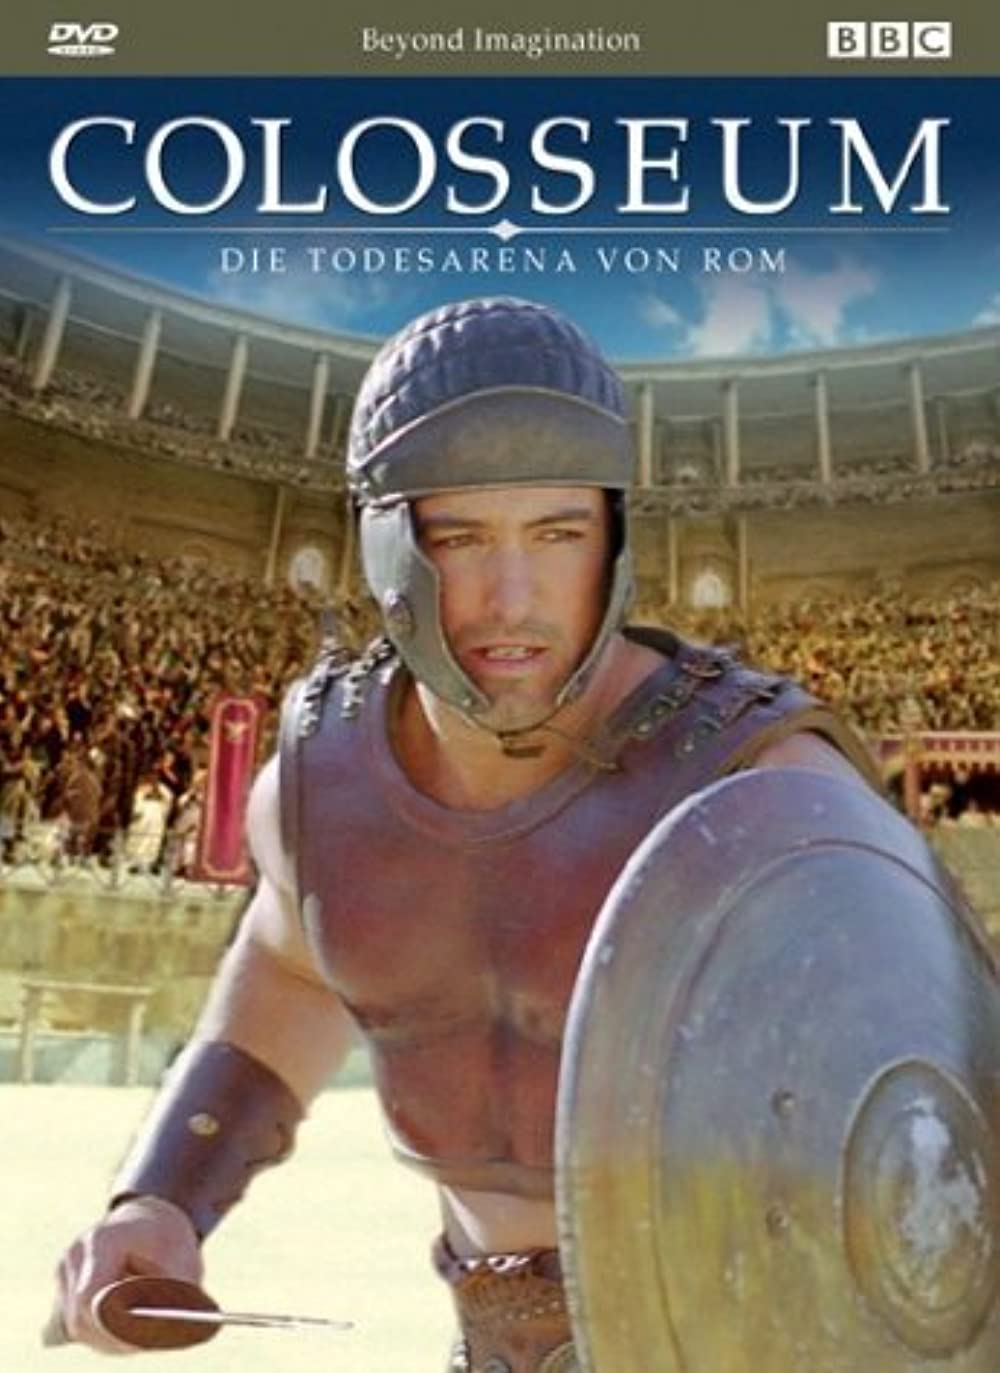 Colosseum: Rome's Arena of Death Movie Download - Colosseum: Rome's Arena Of Death Download